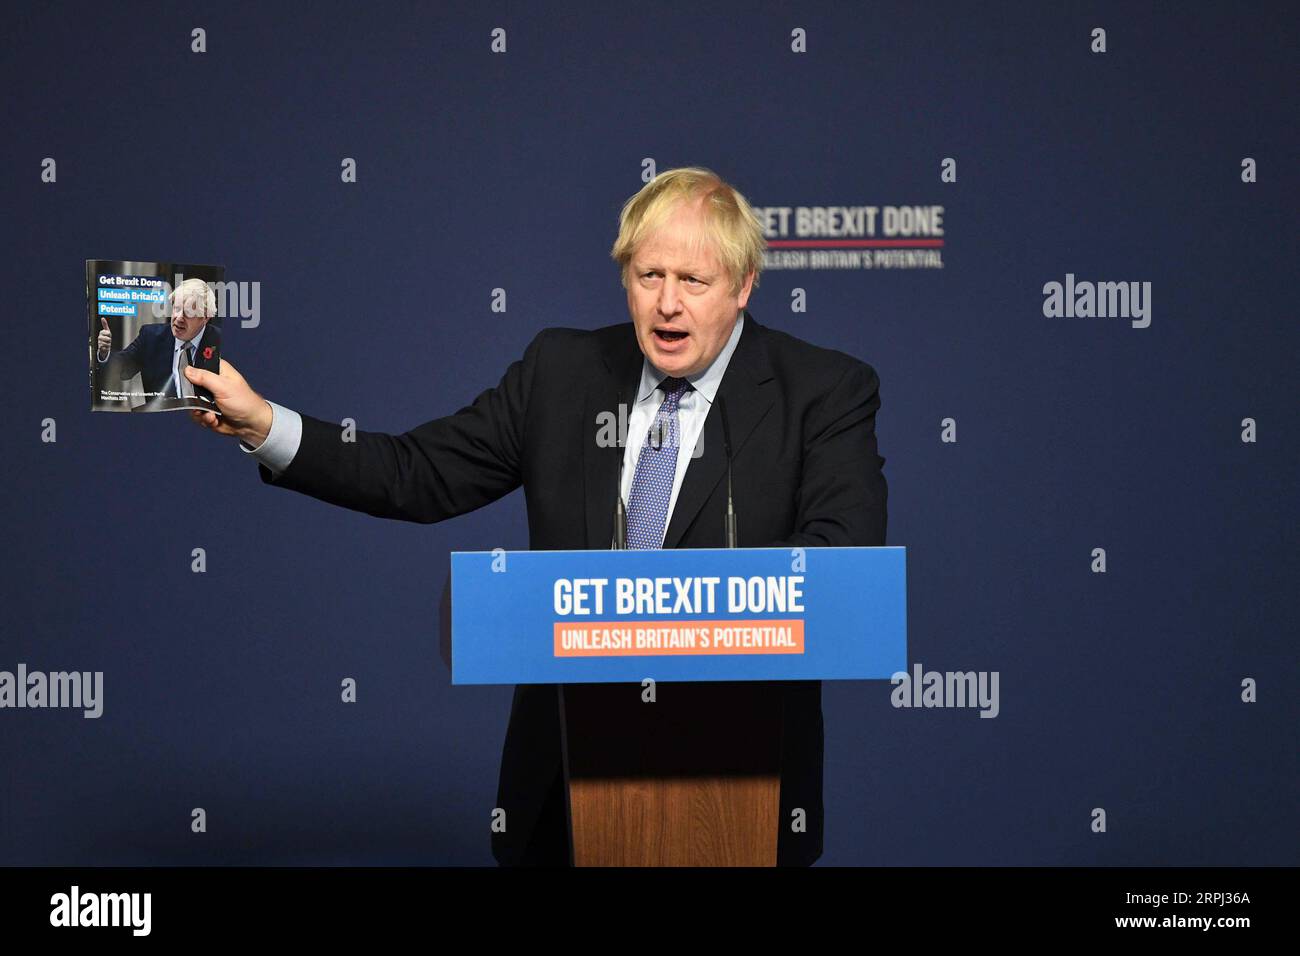 191125 -- TELFORD, Nov. 25, 2019 Xinhua -- British Prime Minister Boris Johnson delivers a speech at the launch of the Conservative Party election manifesto in Telford, Britain on Nov. 24, 2019. British Prime Minister Boris Johnson launched the Conservative Party s election manifesto Sunday, promising to put his Get Brexit Done deal before parliament ahead of Christmas recess. Xinhua-UK OUT BRITAIN-CONSERVATIVE PARTY-ELECTION MANIFESTO-LAUNCH PUBLICATIONxNOTxINxCHN Stock Photo